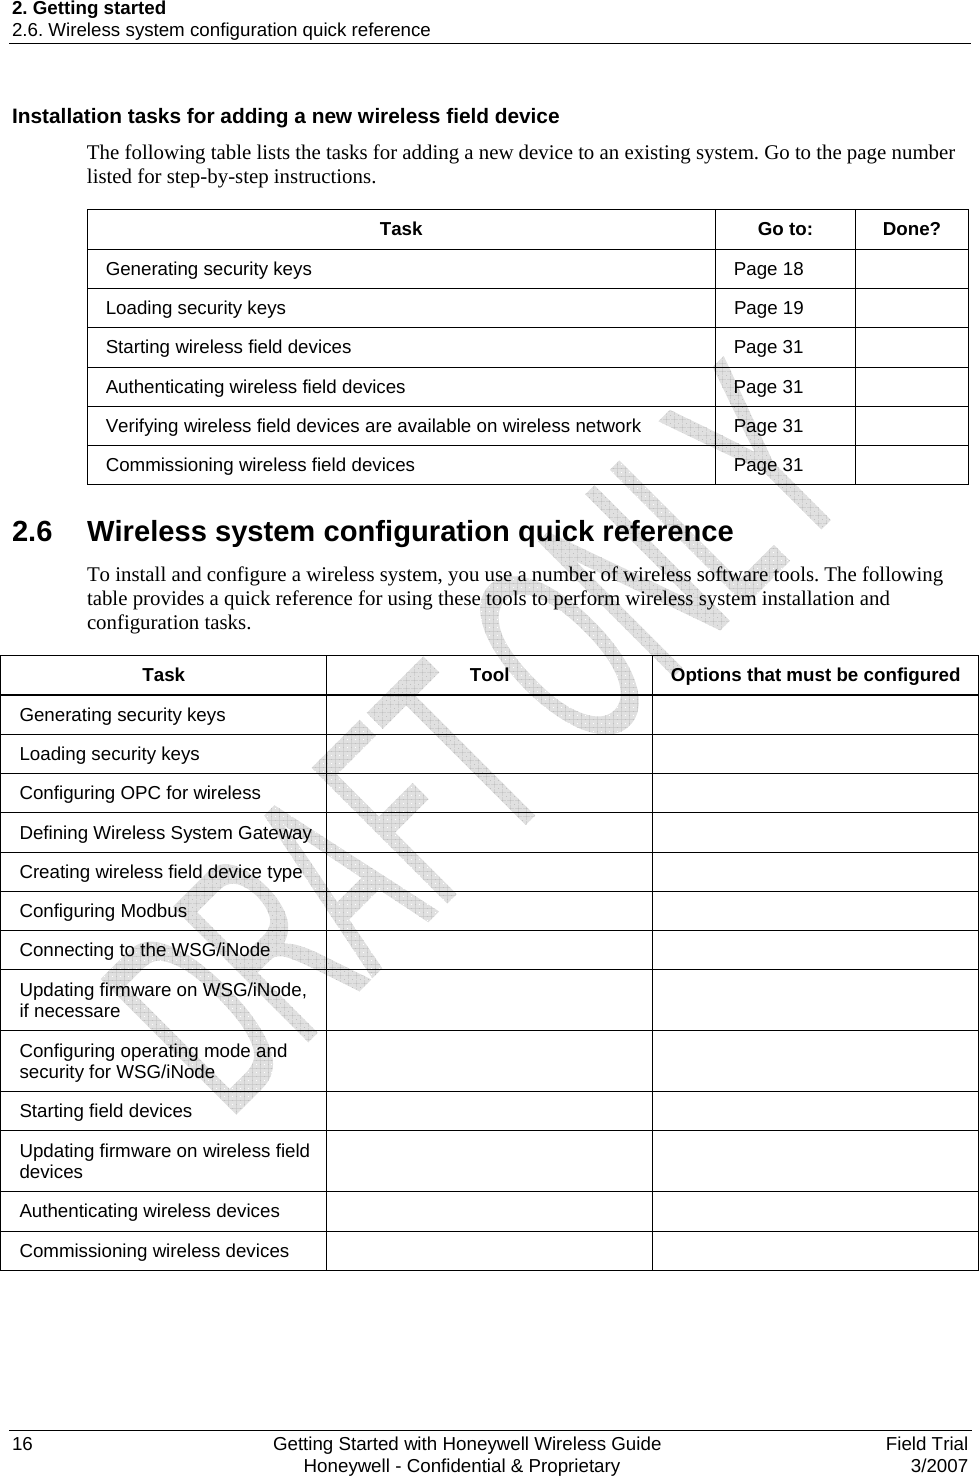 2. Getting started 2.6. Wireless system configuration quick reference 16    Getting Started with Honeywell Wireless Guide  Field Trial   Honeywell - Confidential &amp; Proprietary  3/2007 Installation tasks for adding a new wireless field device The following table lists the tasks for adding a new device to an existing system. Go to the page number listed for step-by-step instructions.  Task Go to: Done? Generating security keys   Page 18   Loading security keys   Page 19   Starting wireless field devices   Page 31   Authenticating wireless field devices   Page 31   Verifying wireless field devices are available on wireless network   Page 31   Commissioning wireless field devices   Page 31    2.6  Wireless system configuration quick reference To install and configure a wireless system, you use a number of wireless software tools. The following table provides a quick reference for using these tools to perform wireless system installation and configuration tasks.   Task  Tool   Options that must be configured Generating security keys     Loading security keys     Configuring OPC for wireless     Defining Wireless System Gateway     Creating wireless field device type      Configuring Modbus     Connecting to the WSG/iNode     Updating firmware on WSG/iNode, if necessare    Configuring operating mode and security for WSG/iNode    Starting field devices     Updating firmware on wireless field devices    Authenticating wireless devices     Commissioning wireless devices       